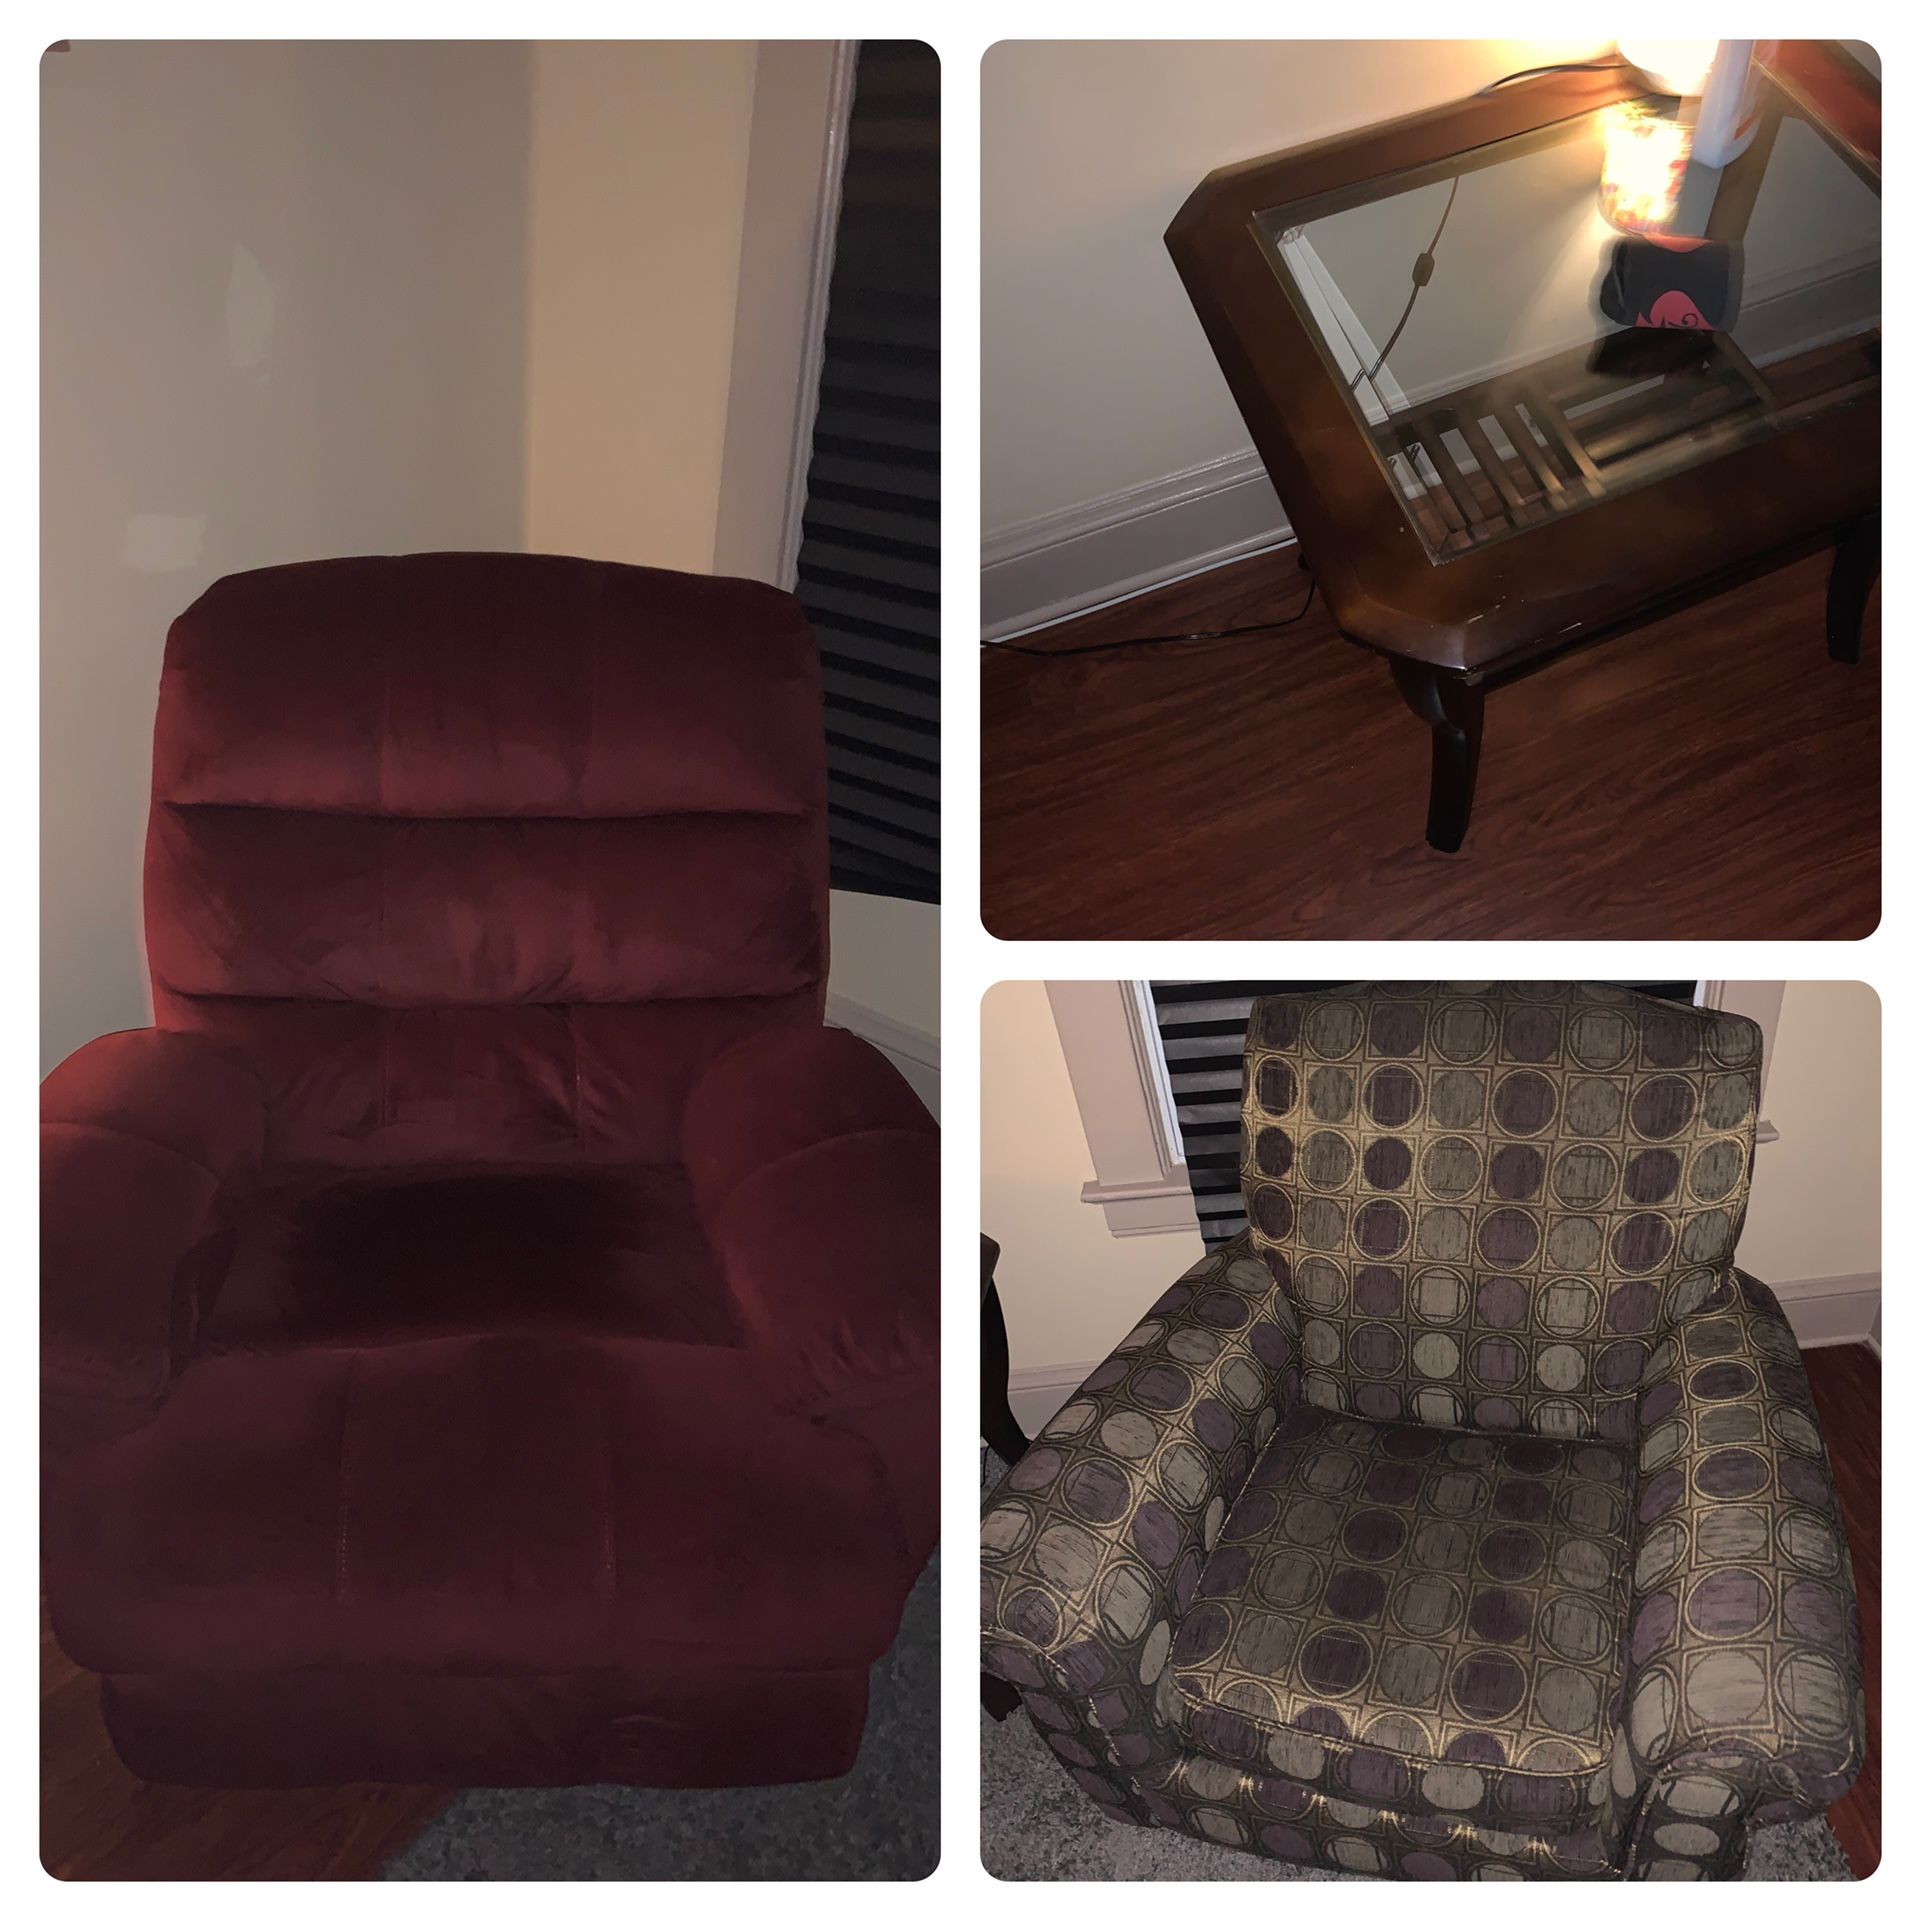 Pick Either Chair And Get 2 Matching End Tables For $65 Or Both Chairs And Tables For $105